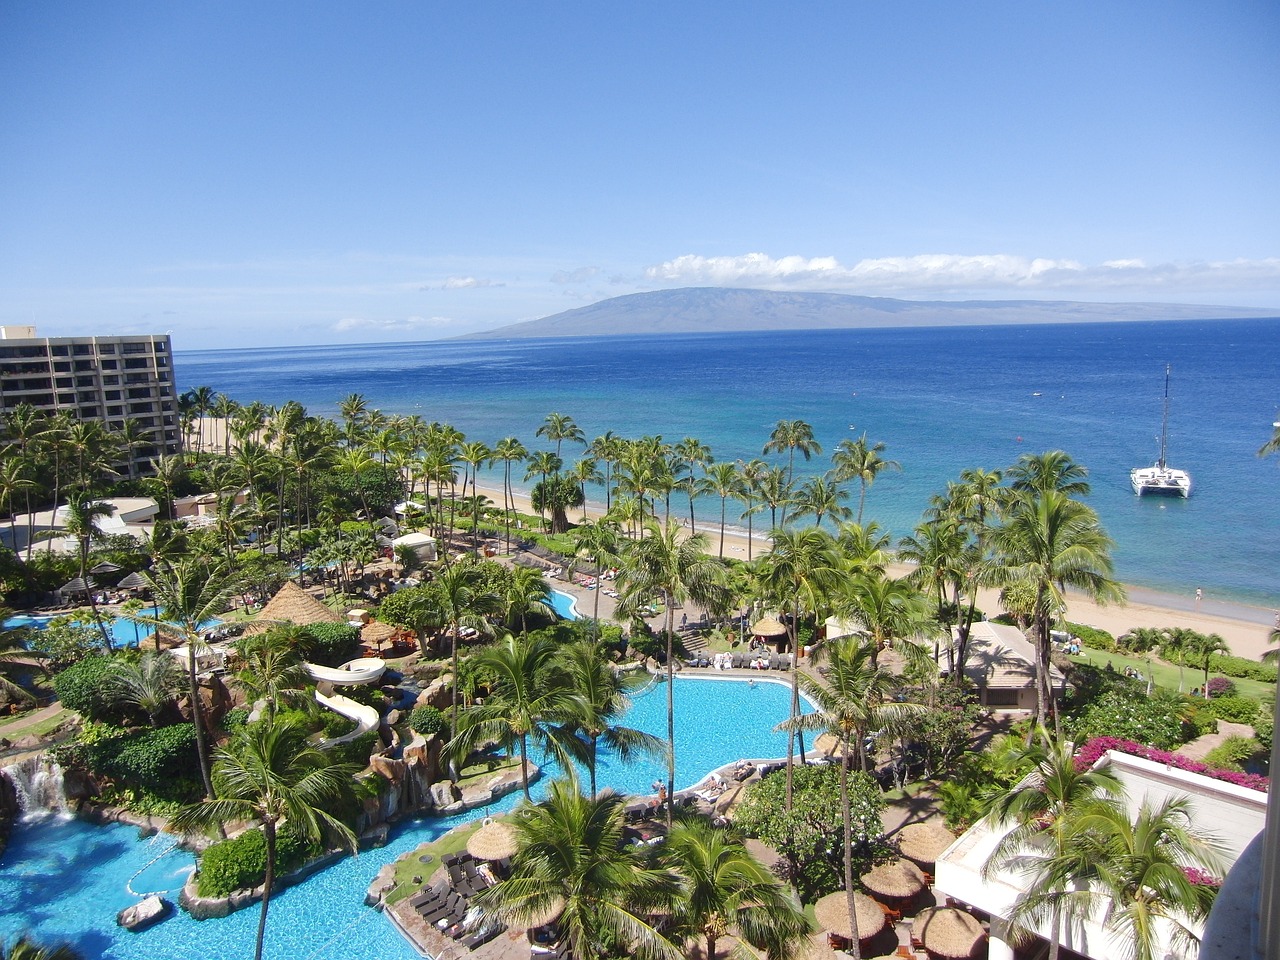 What is the best month to go to Maui?